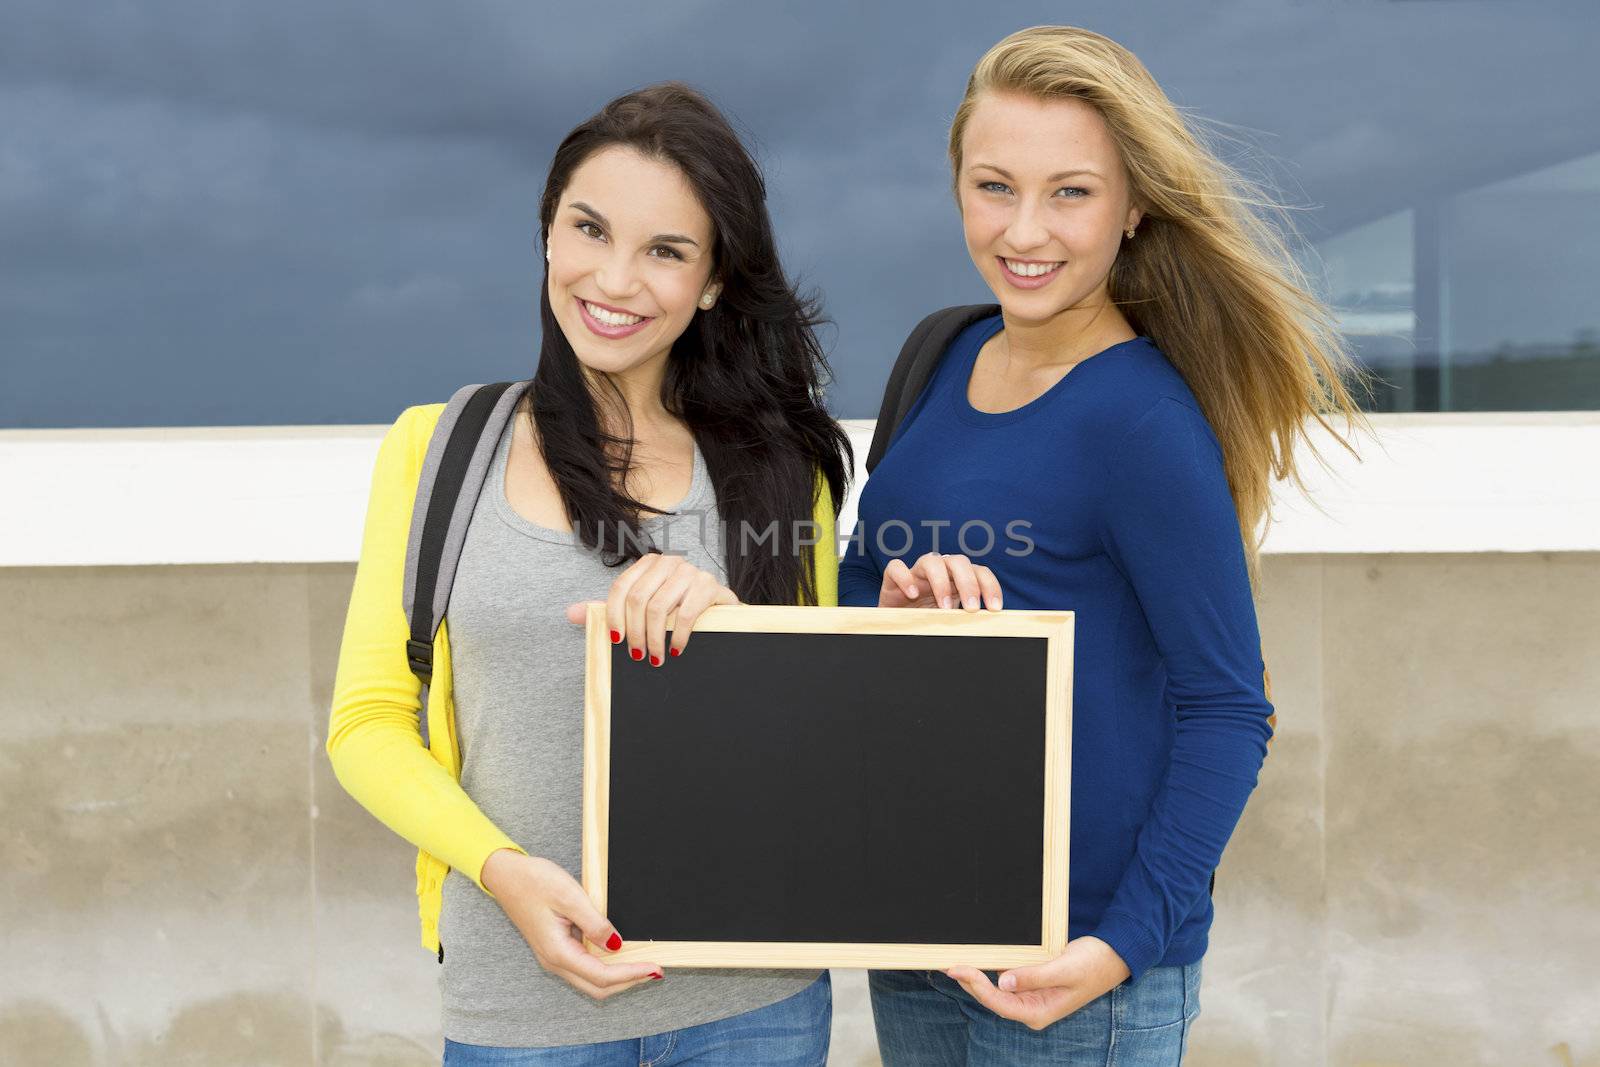 Two beautiful teenage students holding a chalkboard with the slogan Back to School